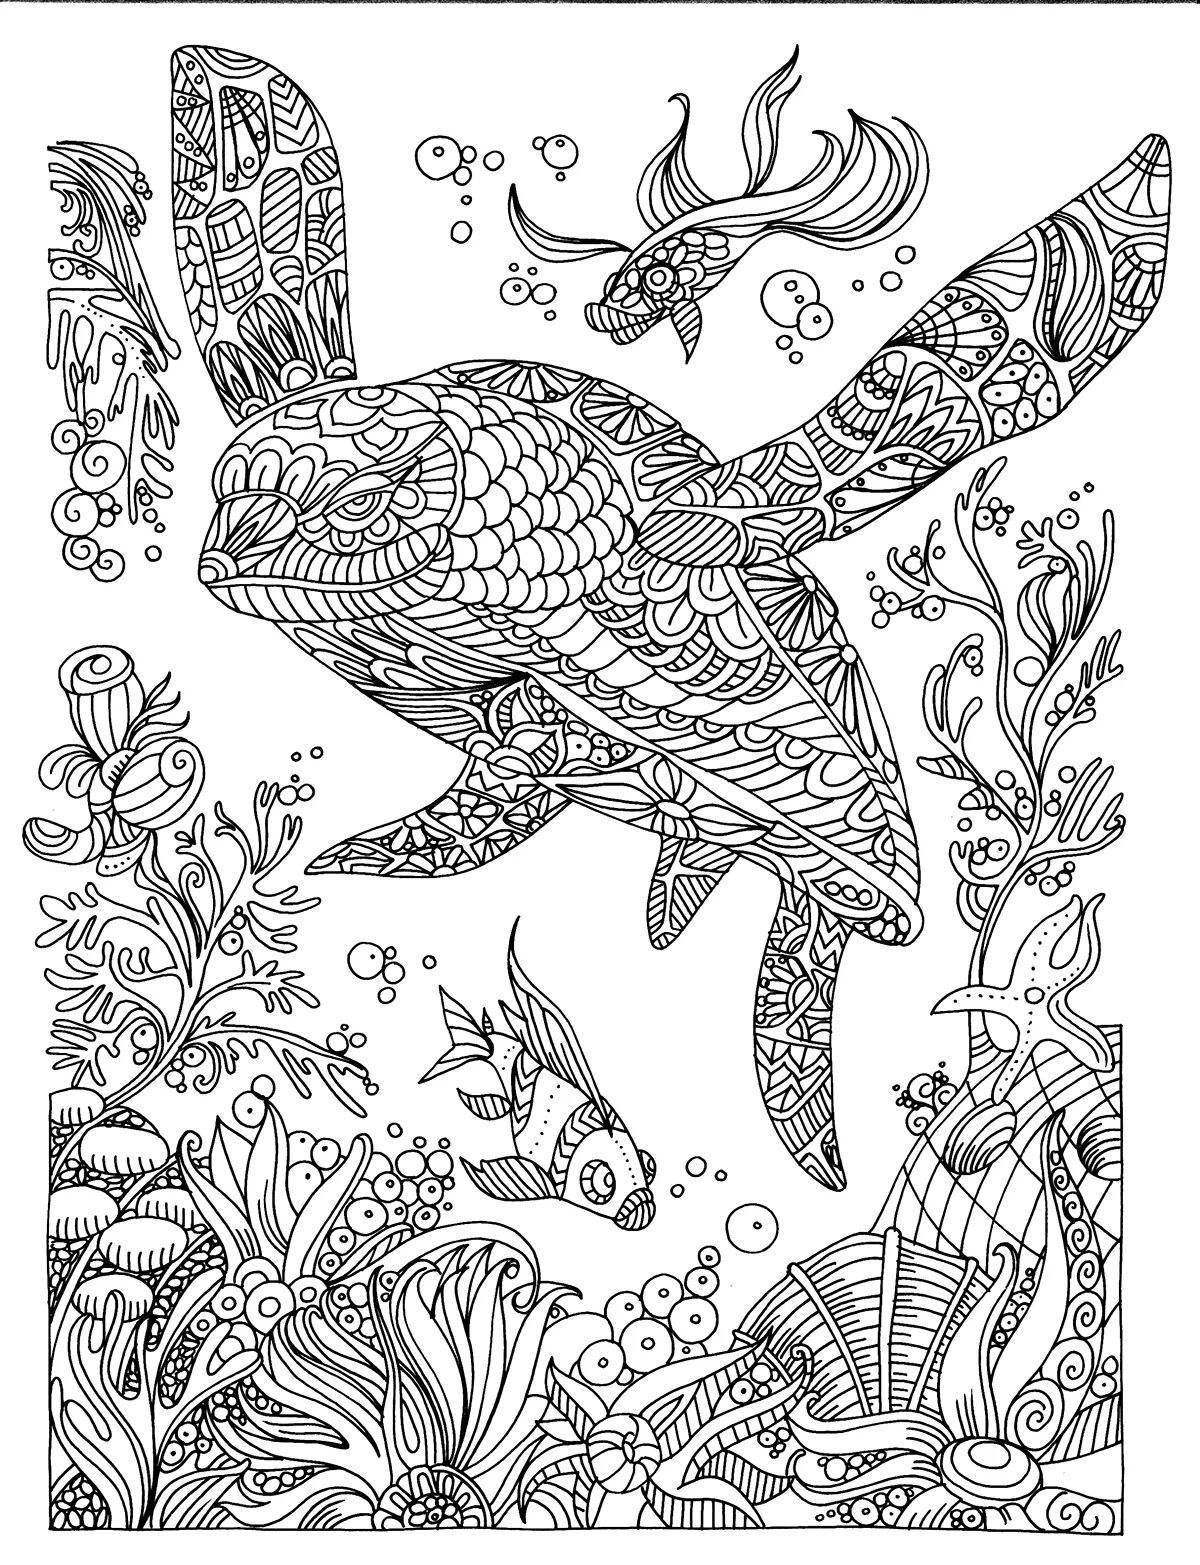 Delicate coloring pages relax living patterns